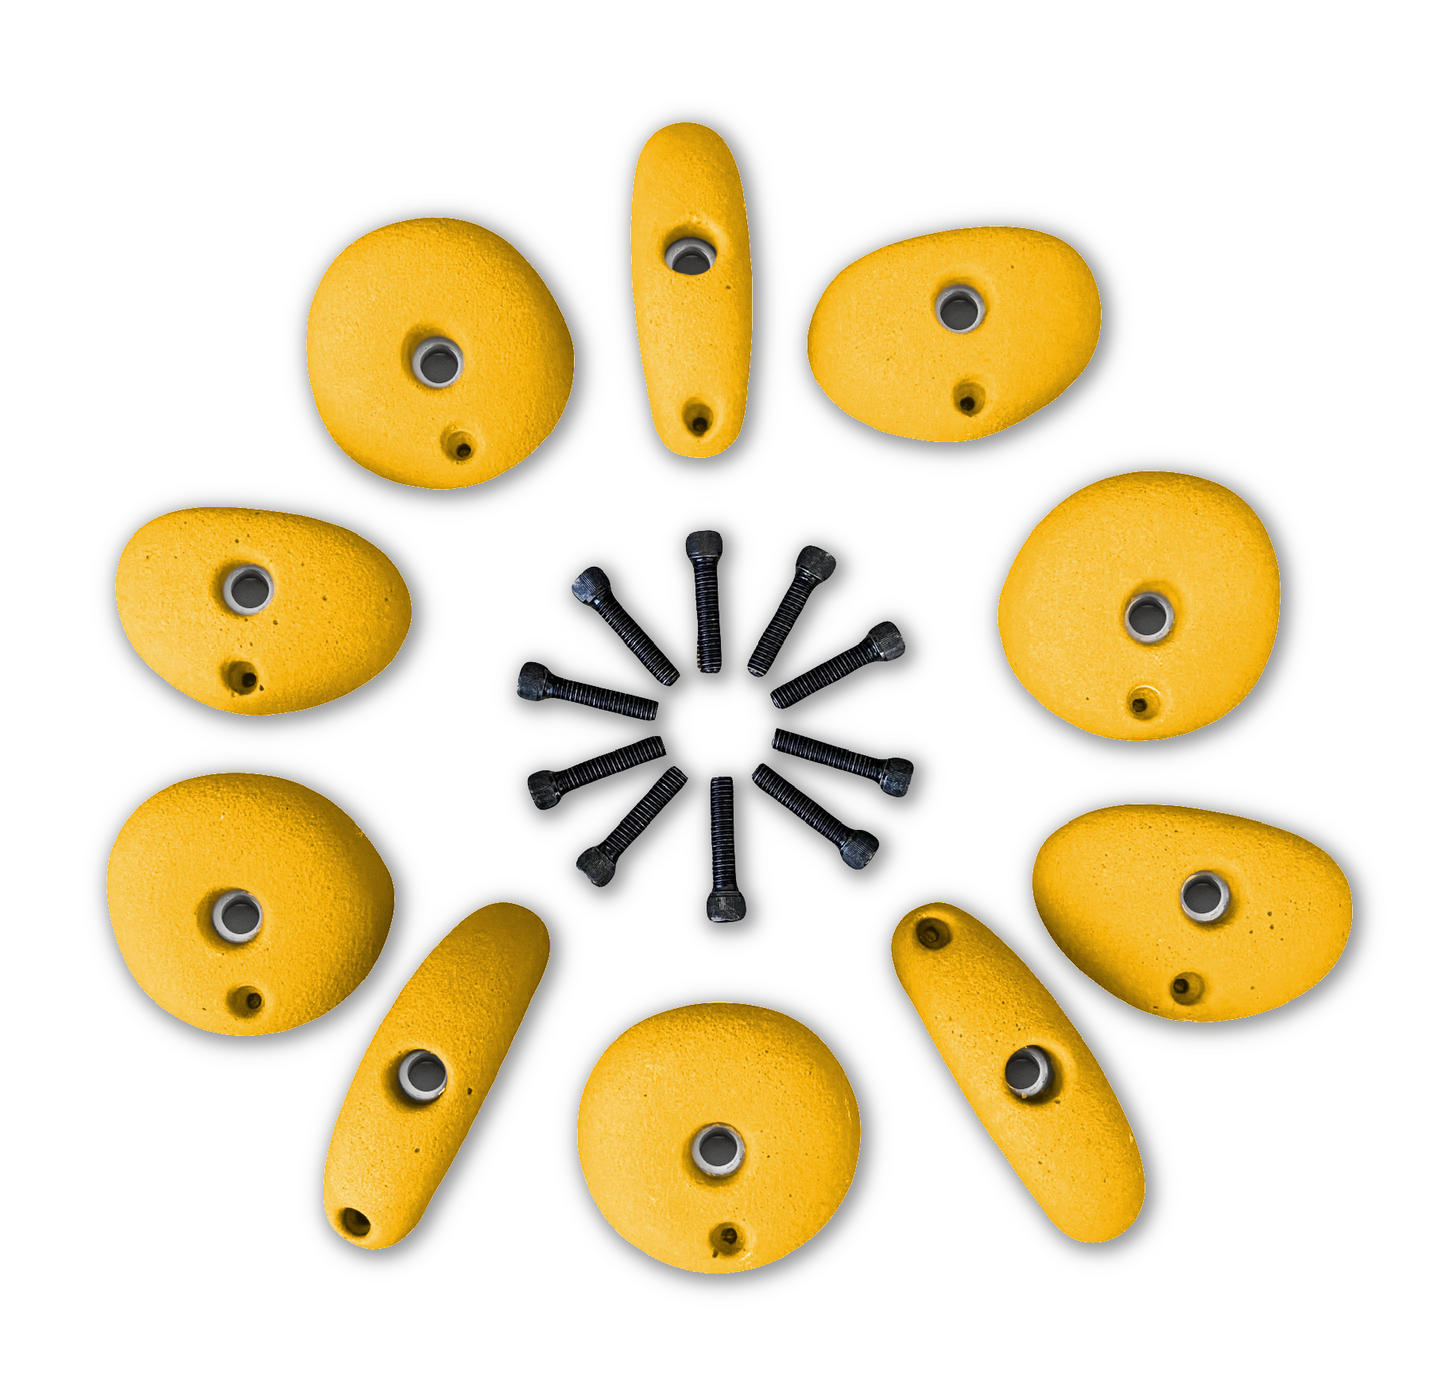 Set of 10 Climbing Holds - Kids Variety Pack